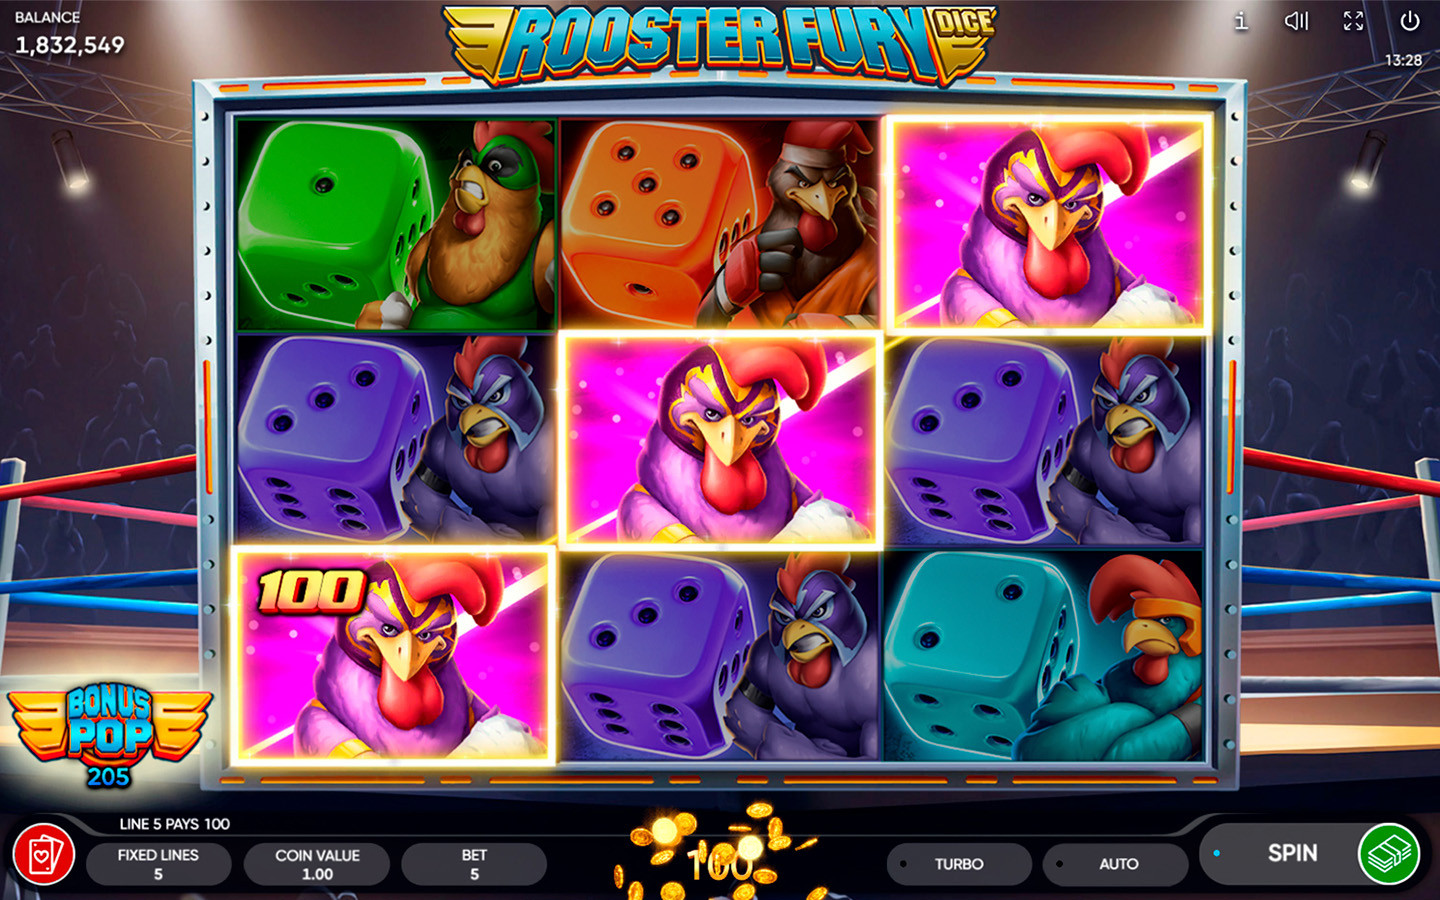 GAMING SOFTWARE PROVIDER | New dice slot game by Endorphina is out!